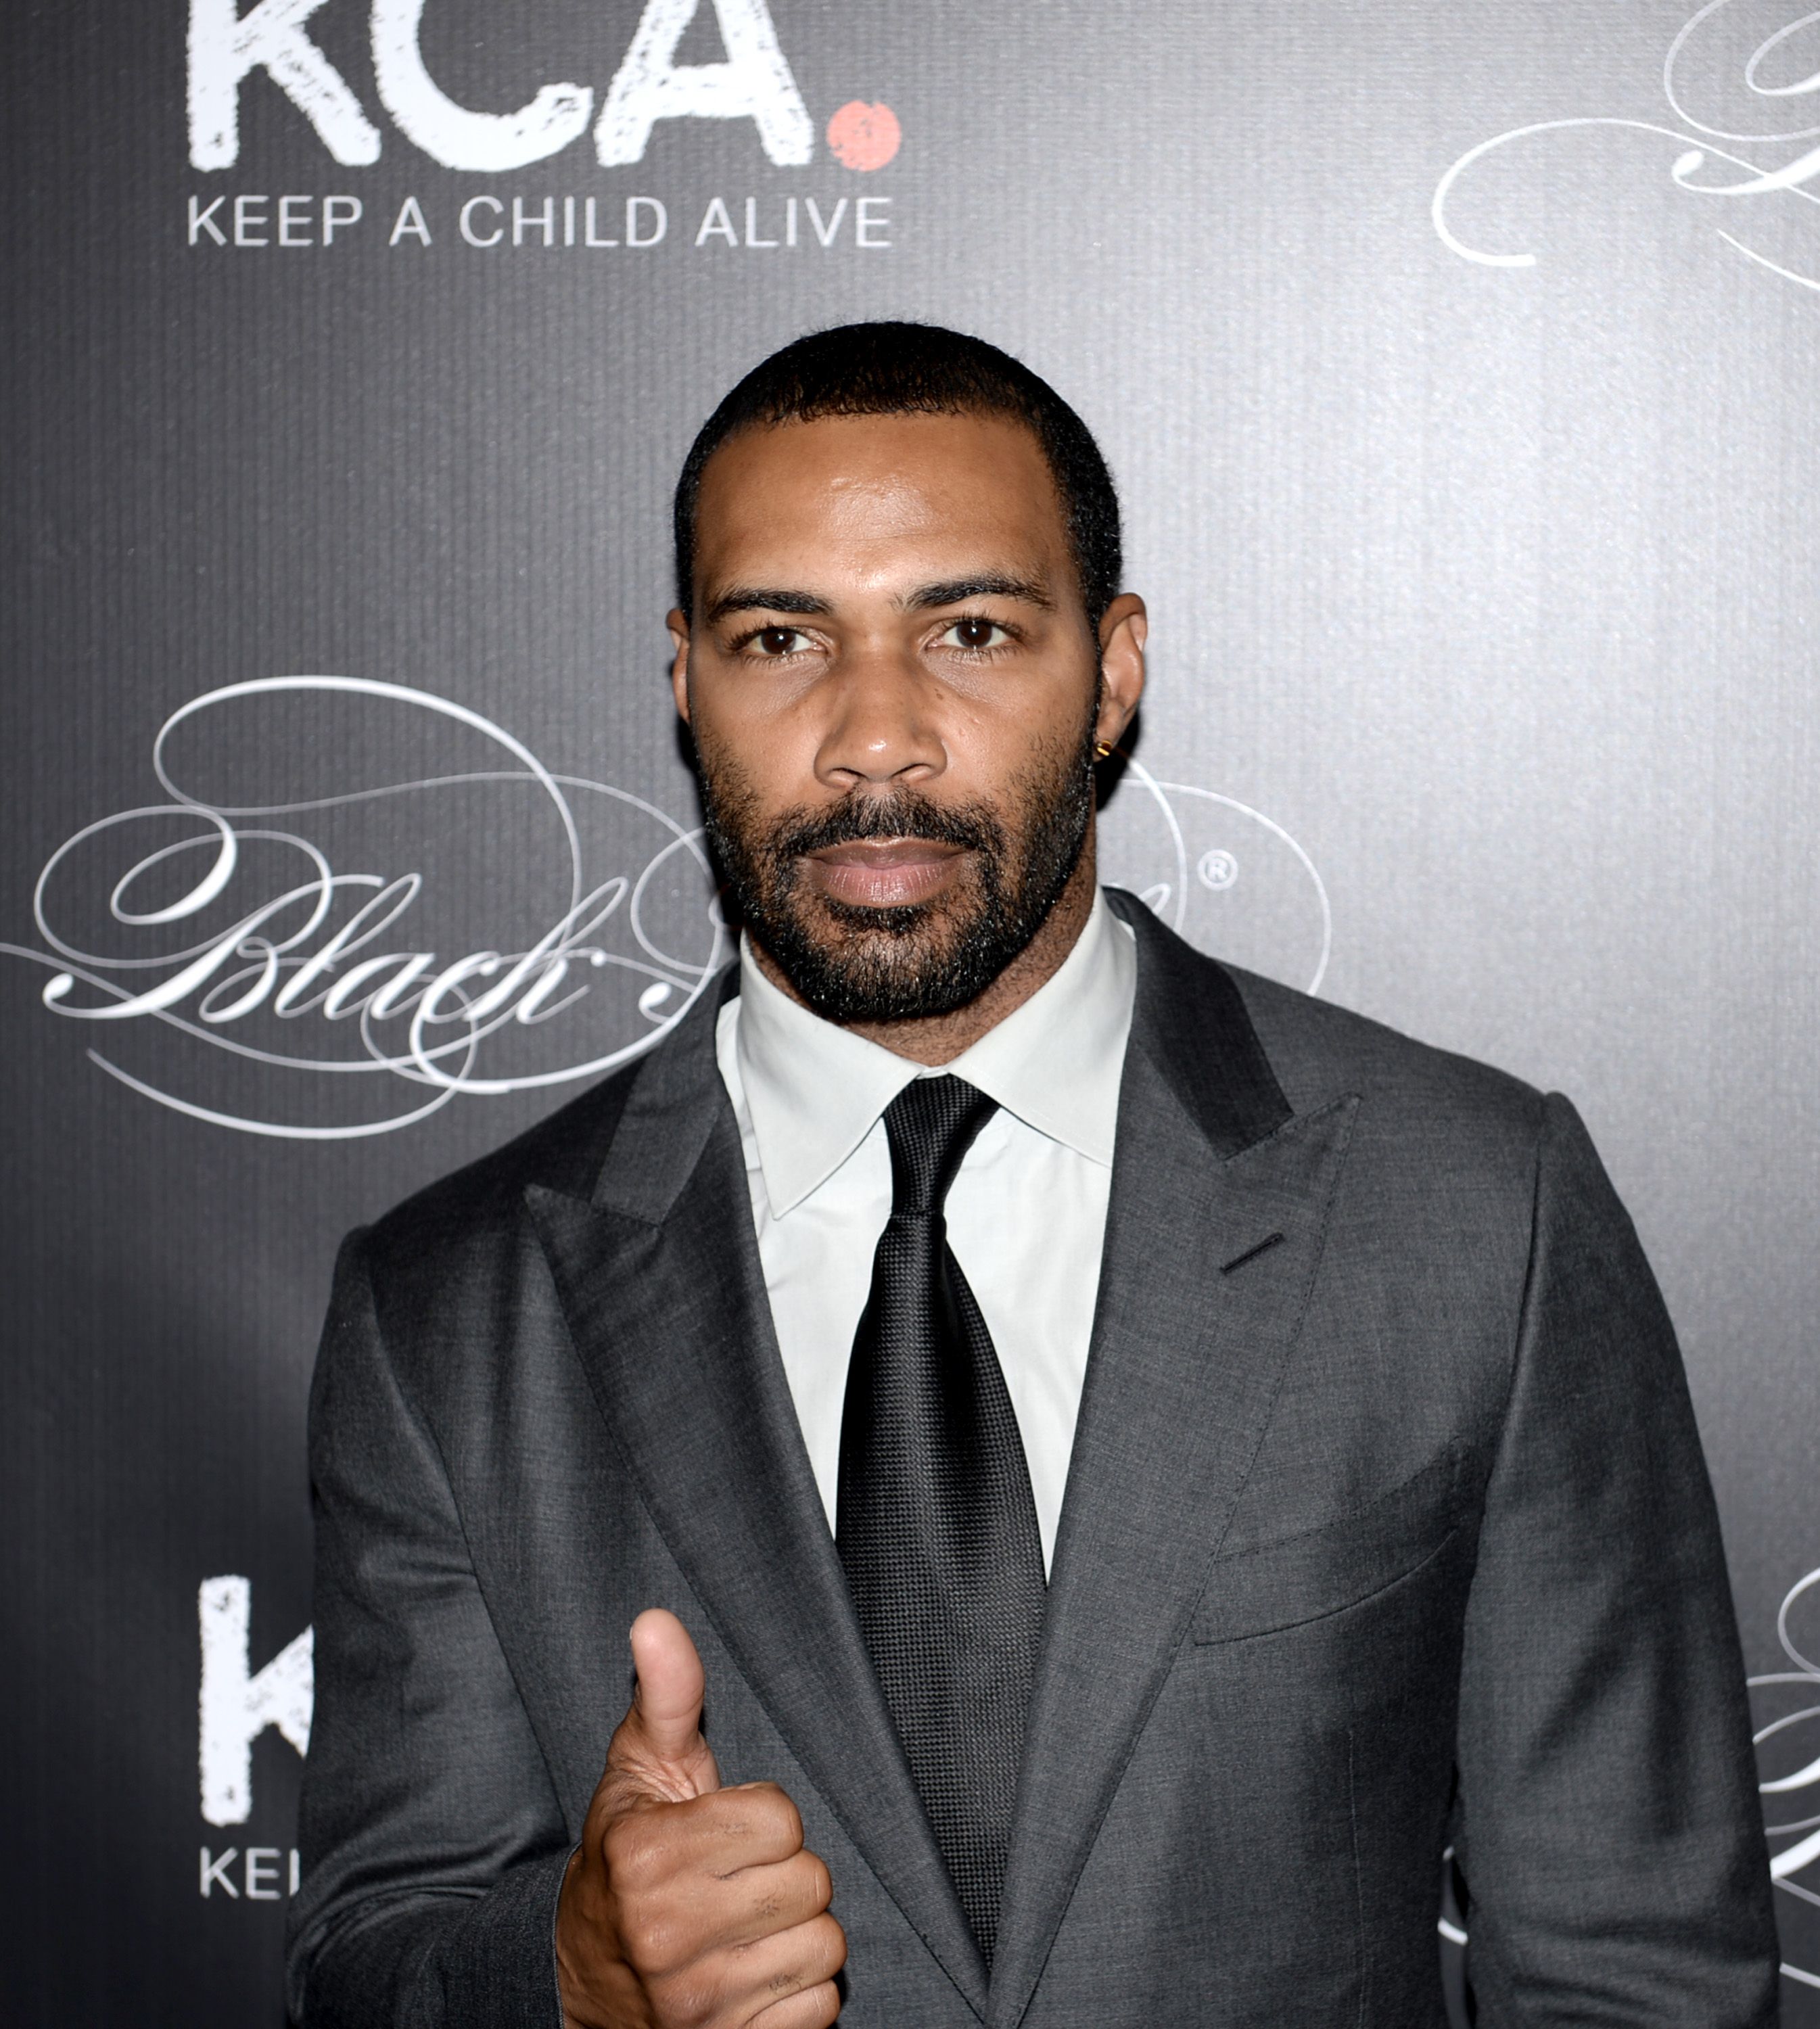 Omari Hardwick during Keep a Child Alive's 13th annual Black Ball at Hammerstein Ballroom on October 19, 2016 in New York City. | Source: Getty Images